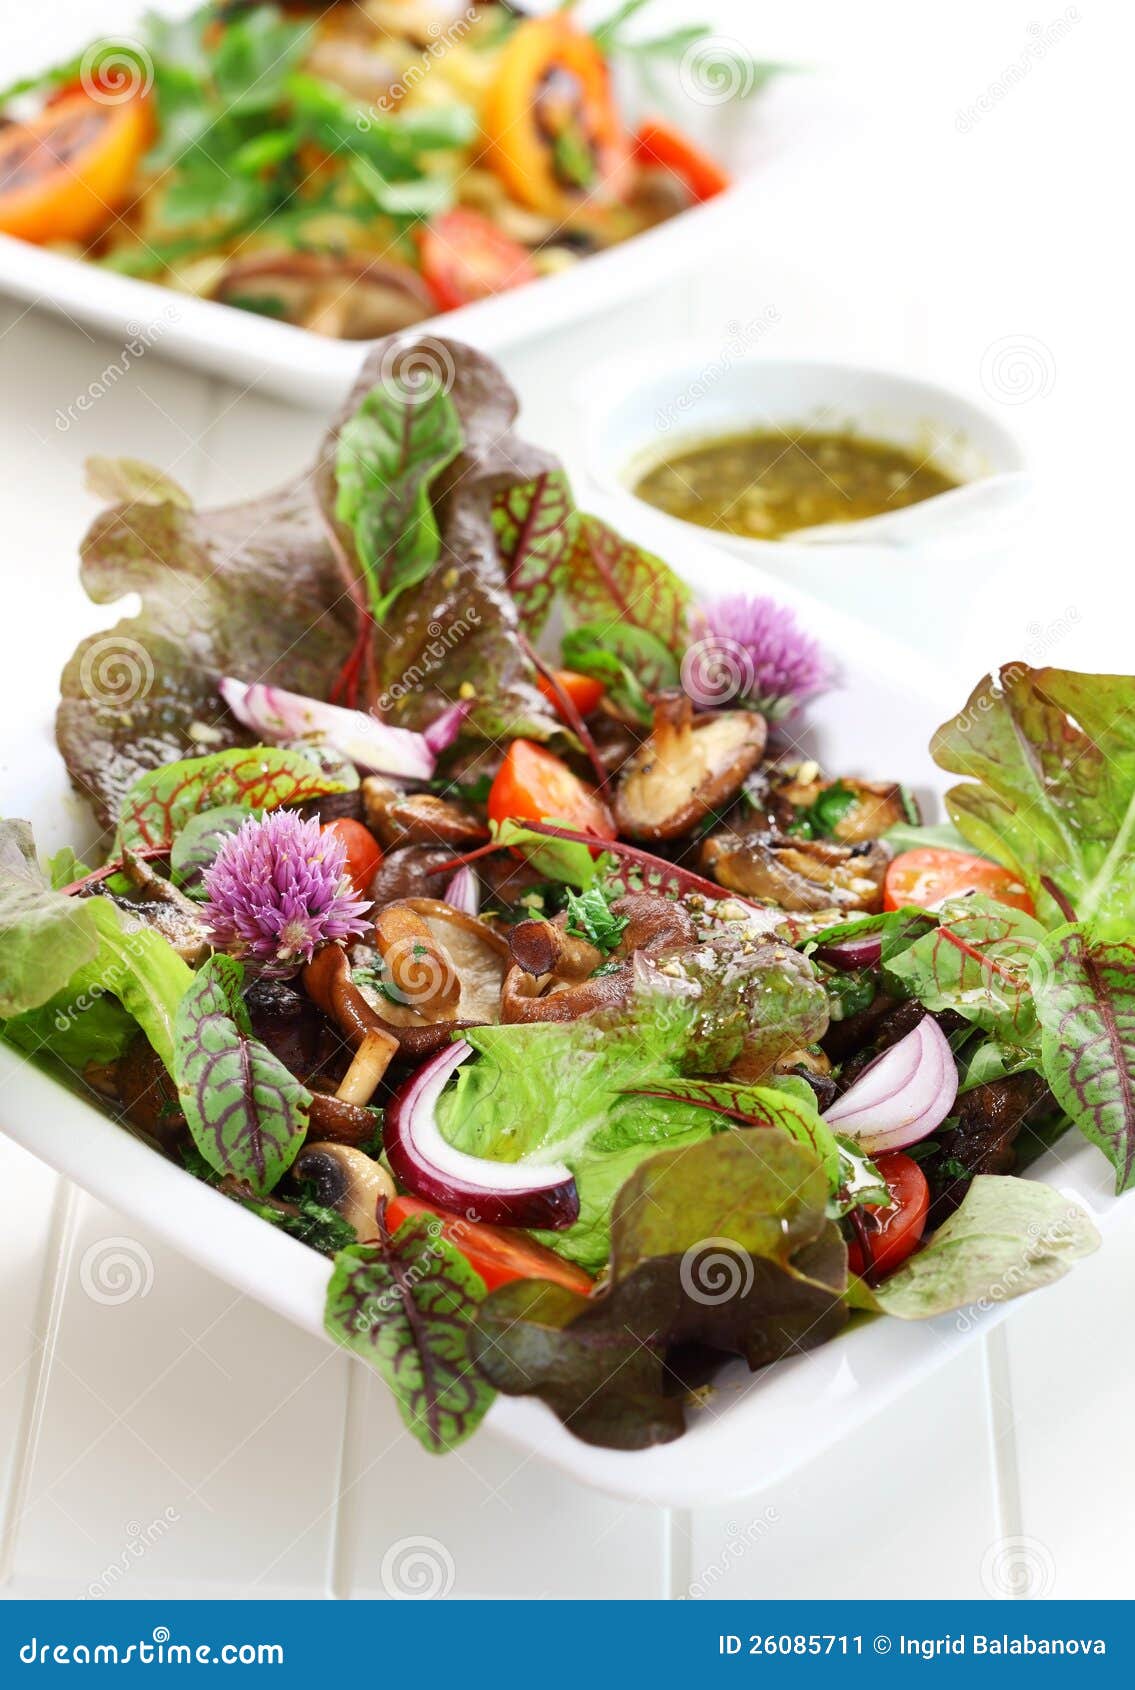 low calorie salad with mushrooms